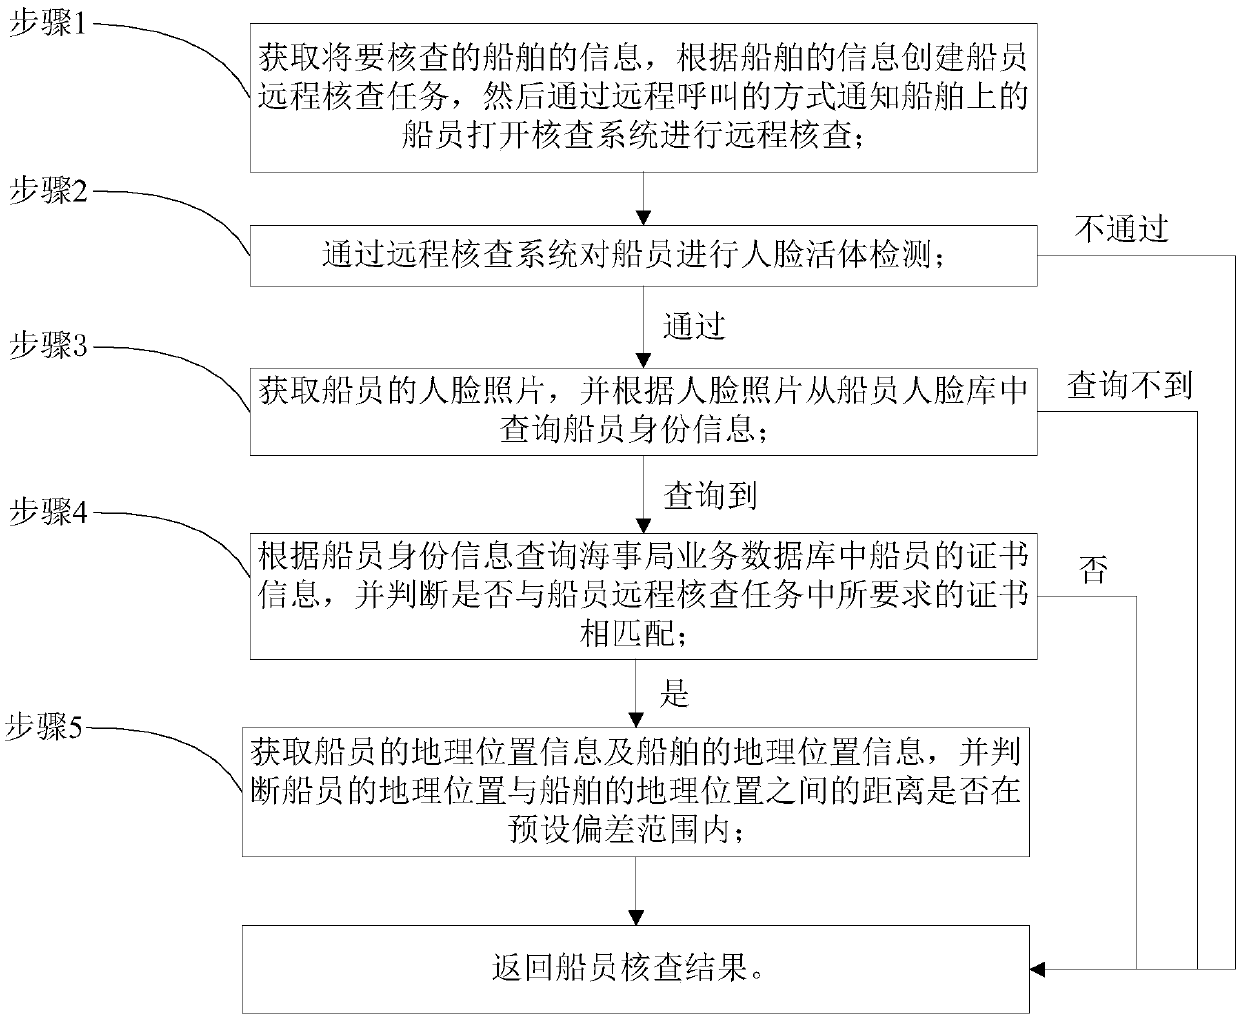 Method and system for remote verification of seamen based on face recognition